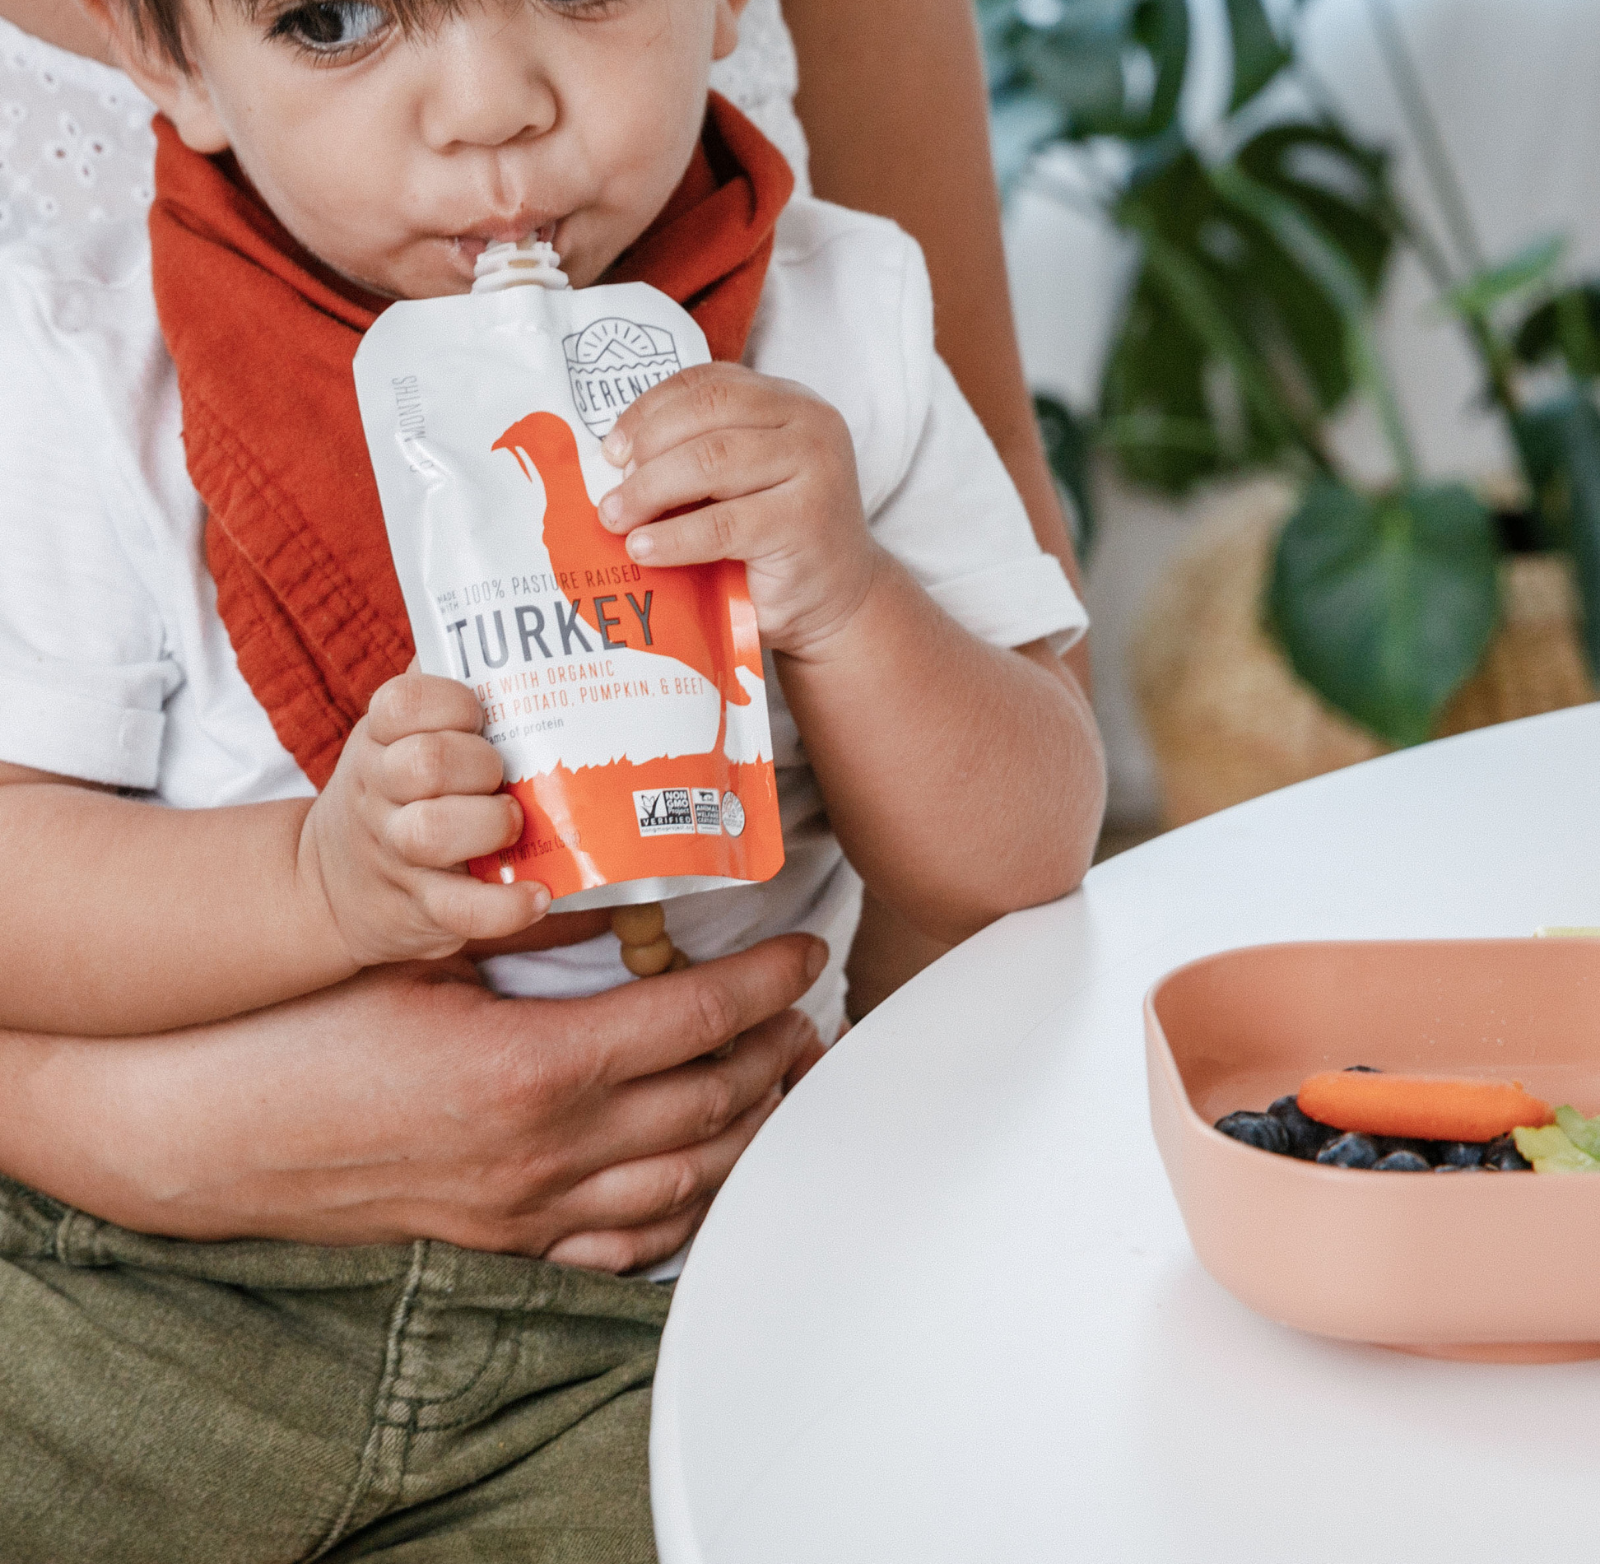 No food processor needed and no artificial flavors - Serenity Kids